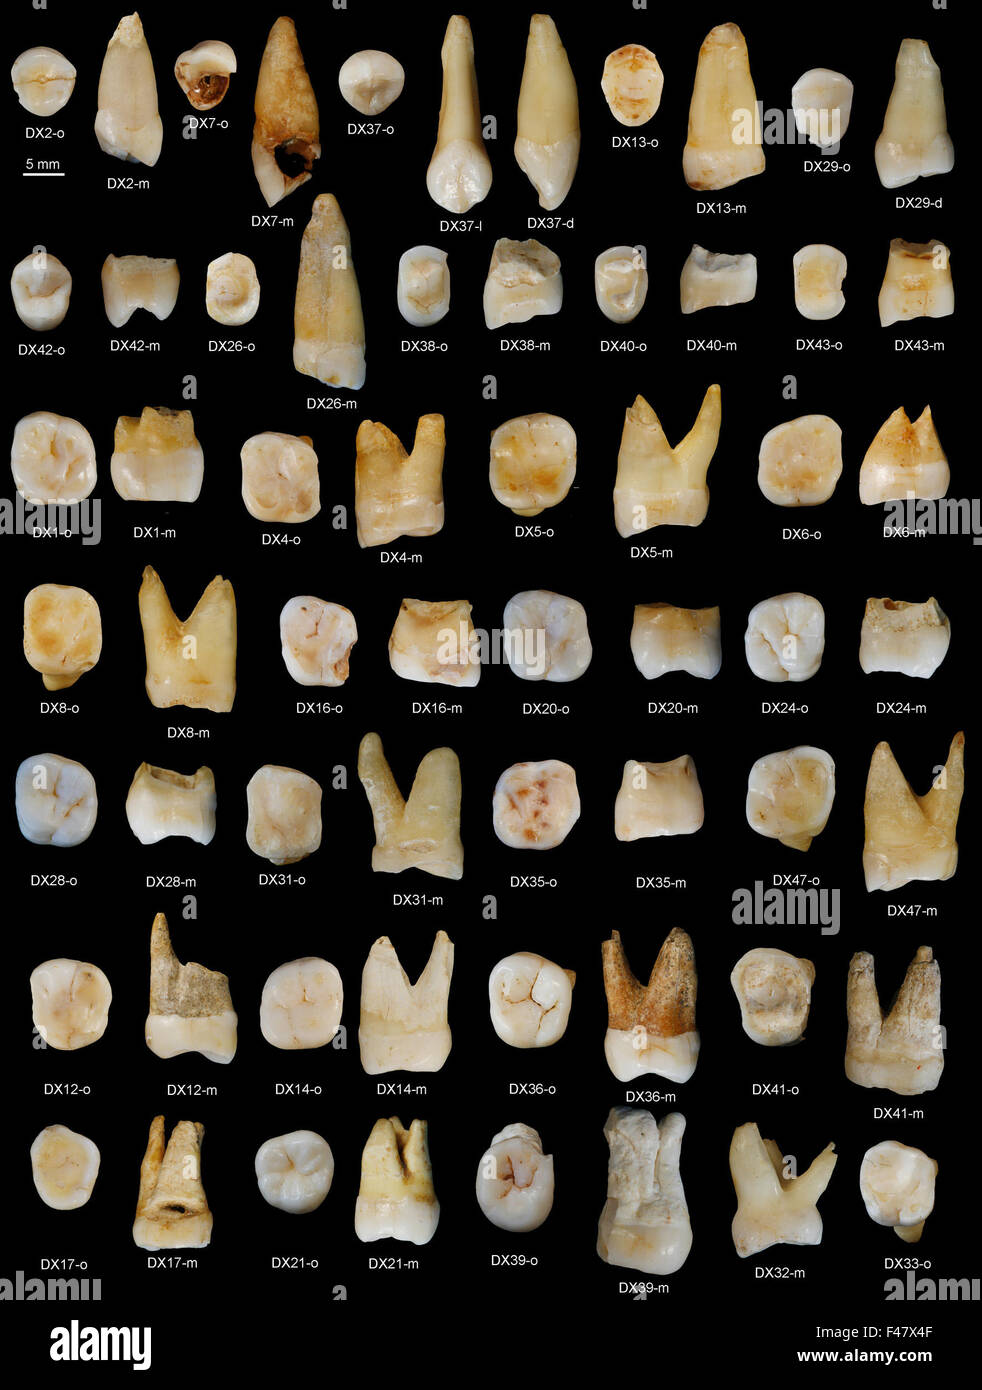 (151015) -- BEIJING, Oct. 15, 2015 (Xinhua) -- Photo provided by the Institute of Vertebrate Paleontology and Paleoanthropology under the Chinese Academy of Sciences shows tooth fossils found in Daoxian county in central China's Hunan Province. These tooth fossils indicate the early form of modern homo sapiens appeared in the region more than 80,000 years ago. The 47 fossils, found in Daoxian county, date back from 80,000 to 120,000 years and are believed to be the oldest remains of a completely modern form scientists have known in the east Asia region, the study's leading scientists said on O Stock Photo